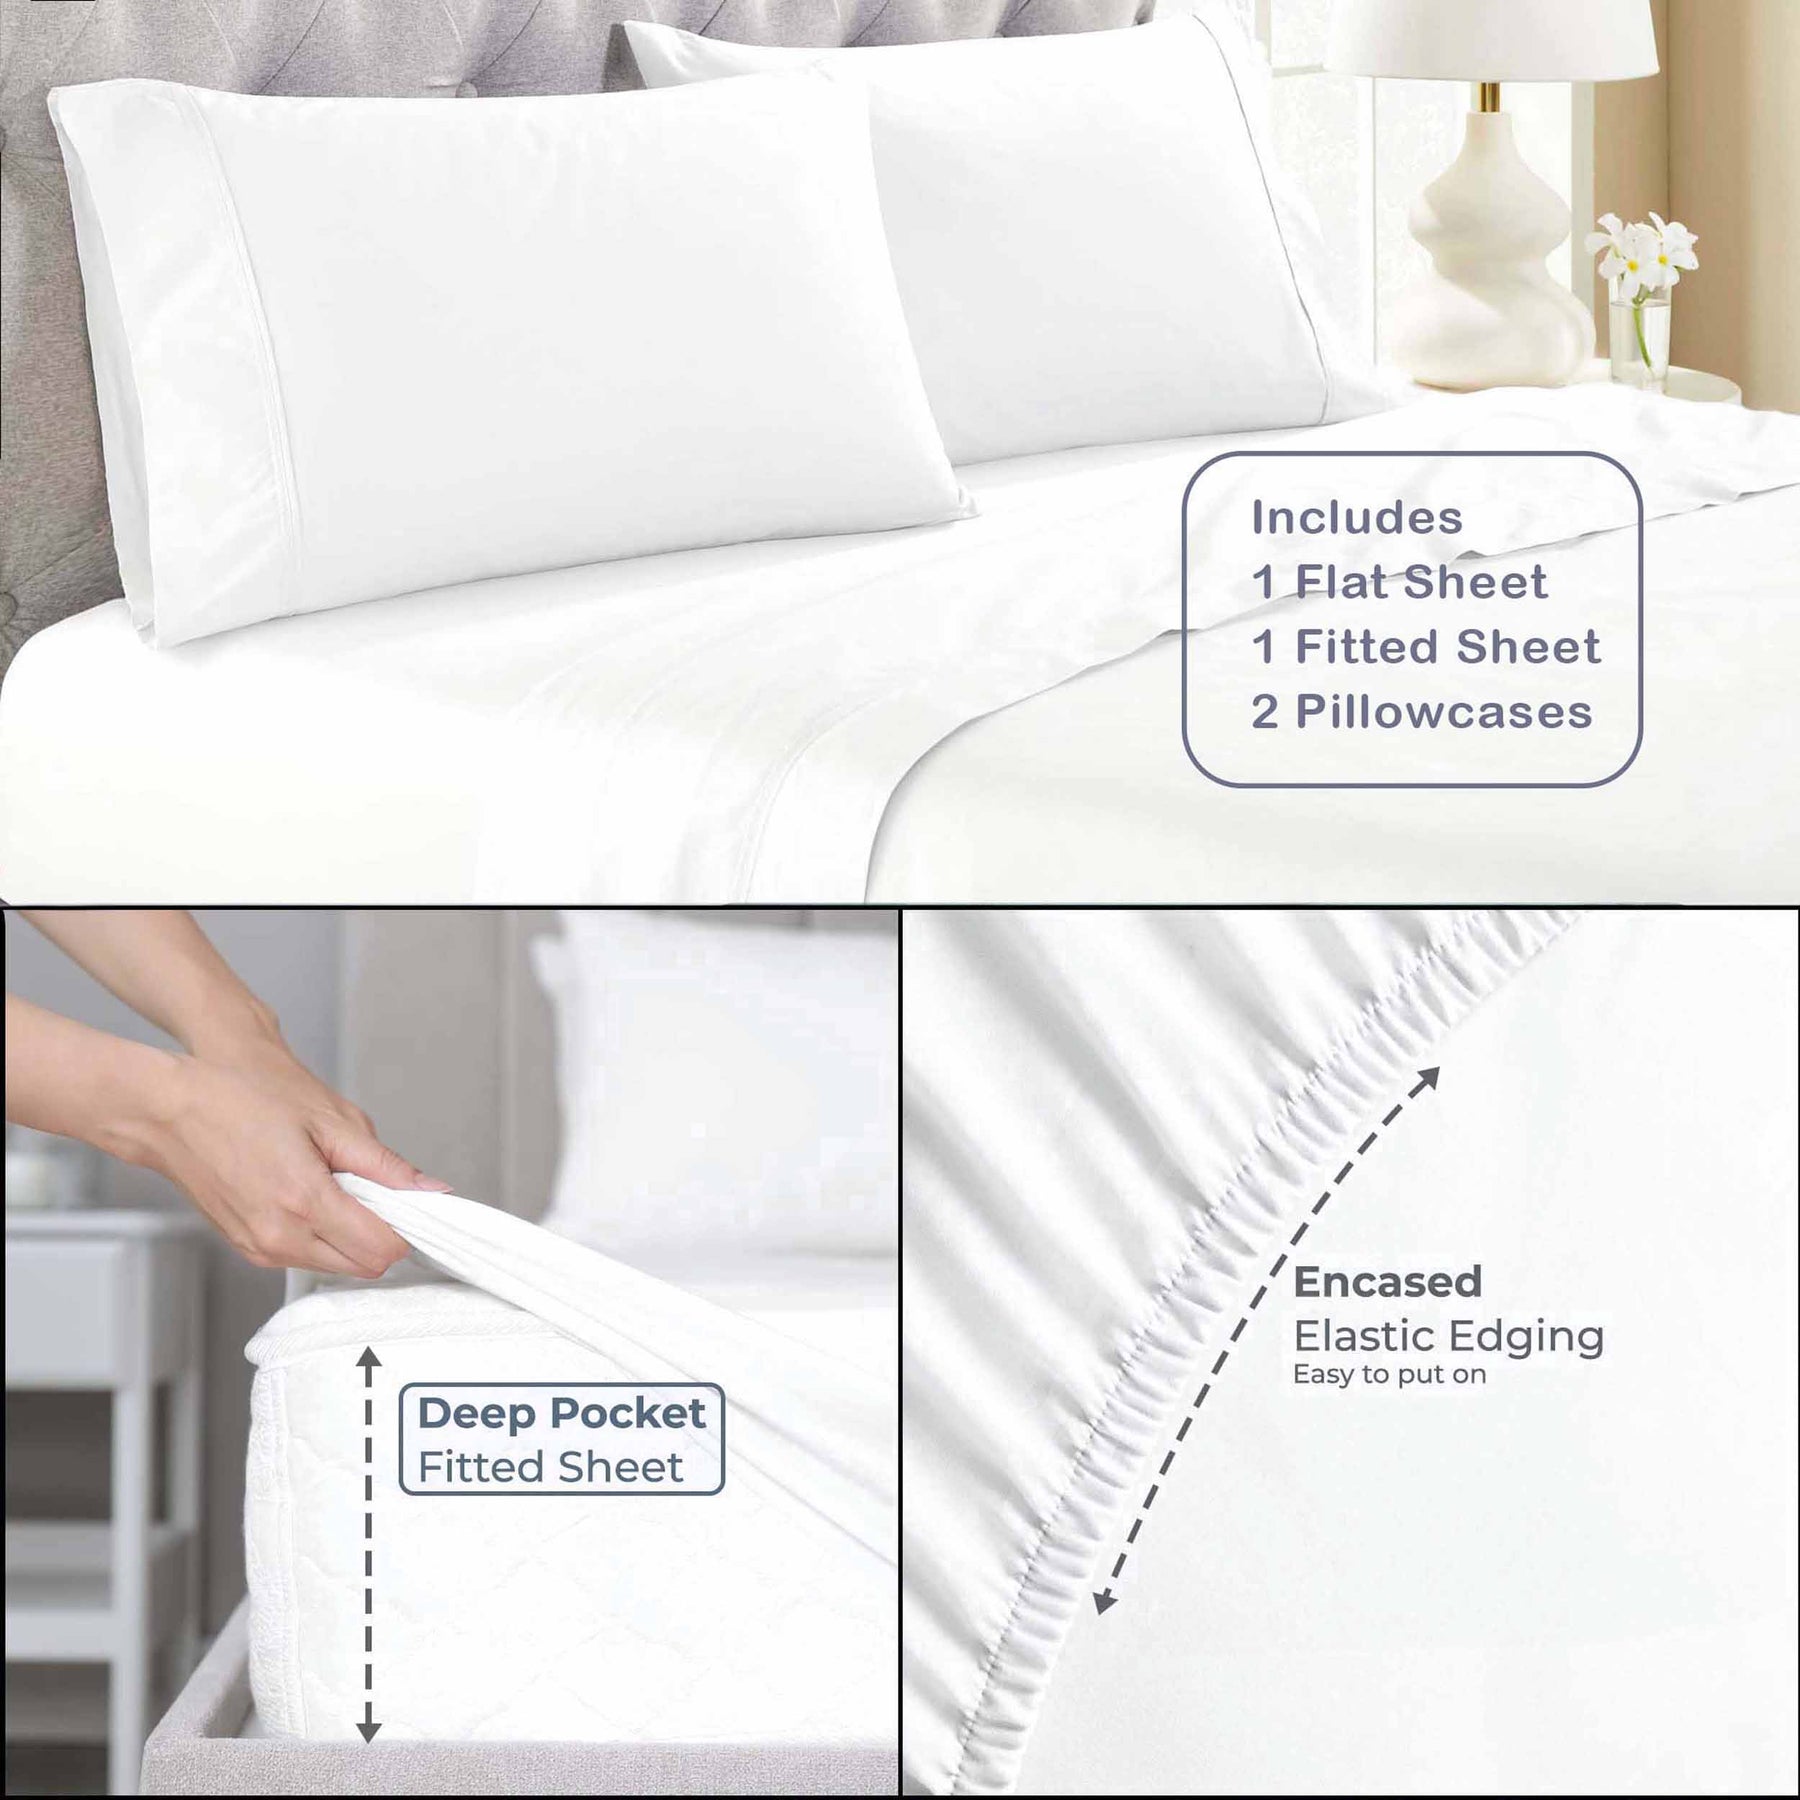 Organic Cotton 300 Thread Count Percale Deep Pocket Bed Sheet Set -White